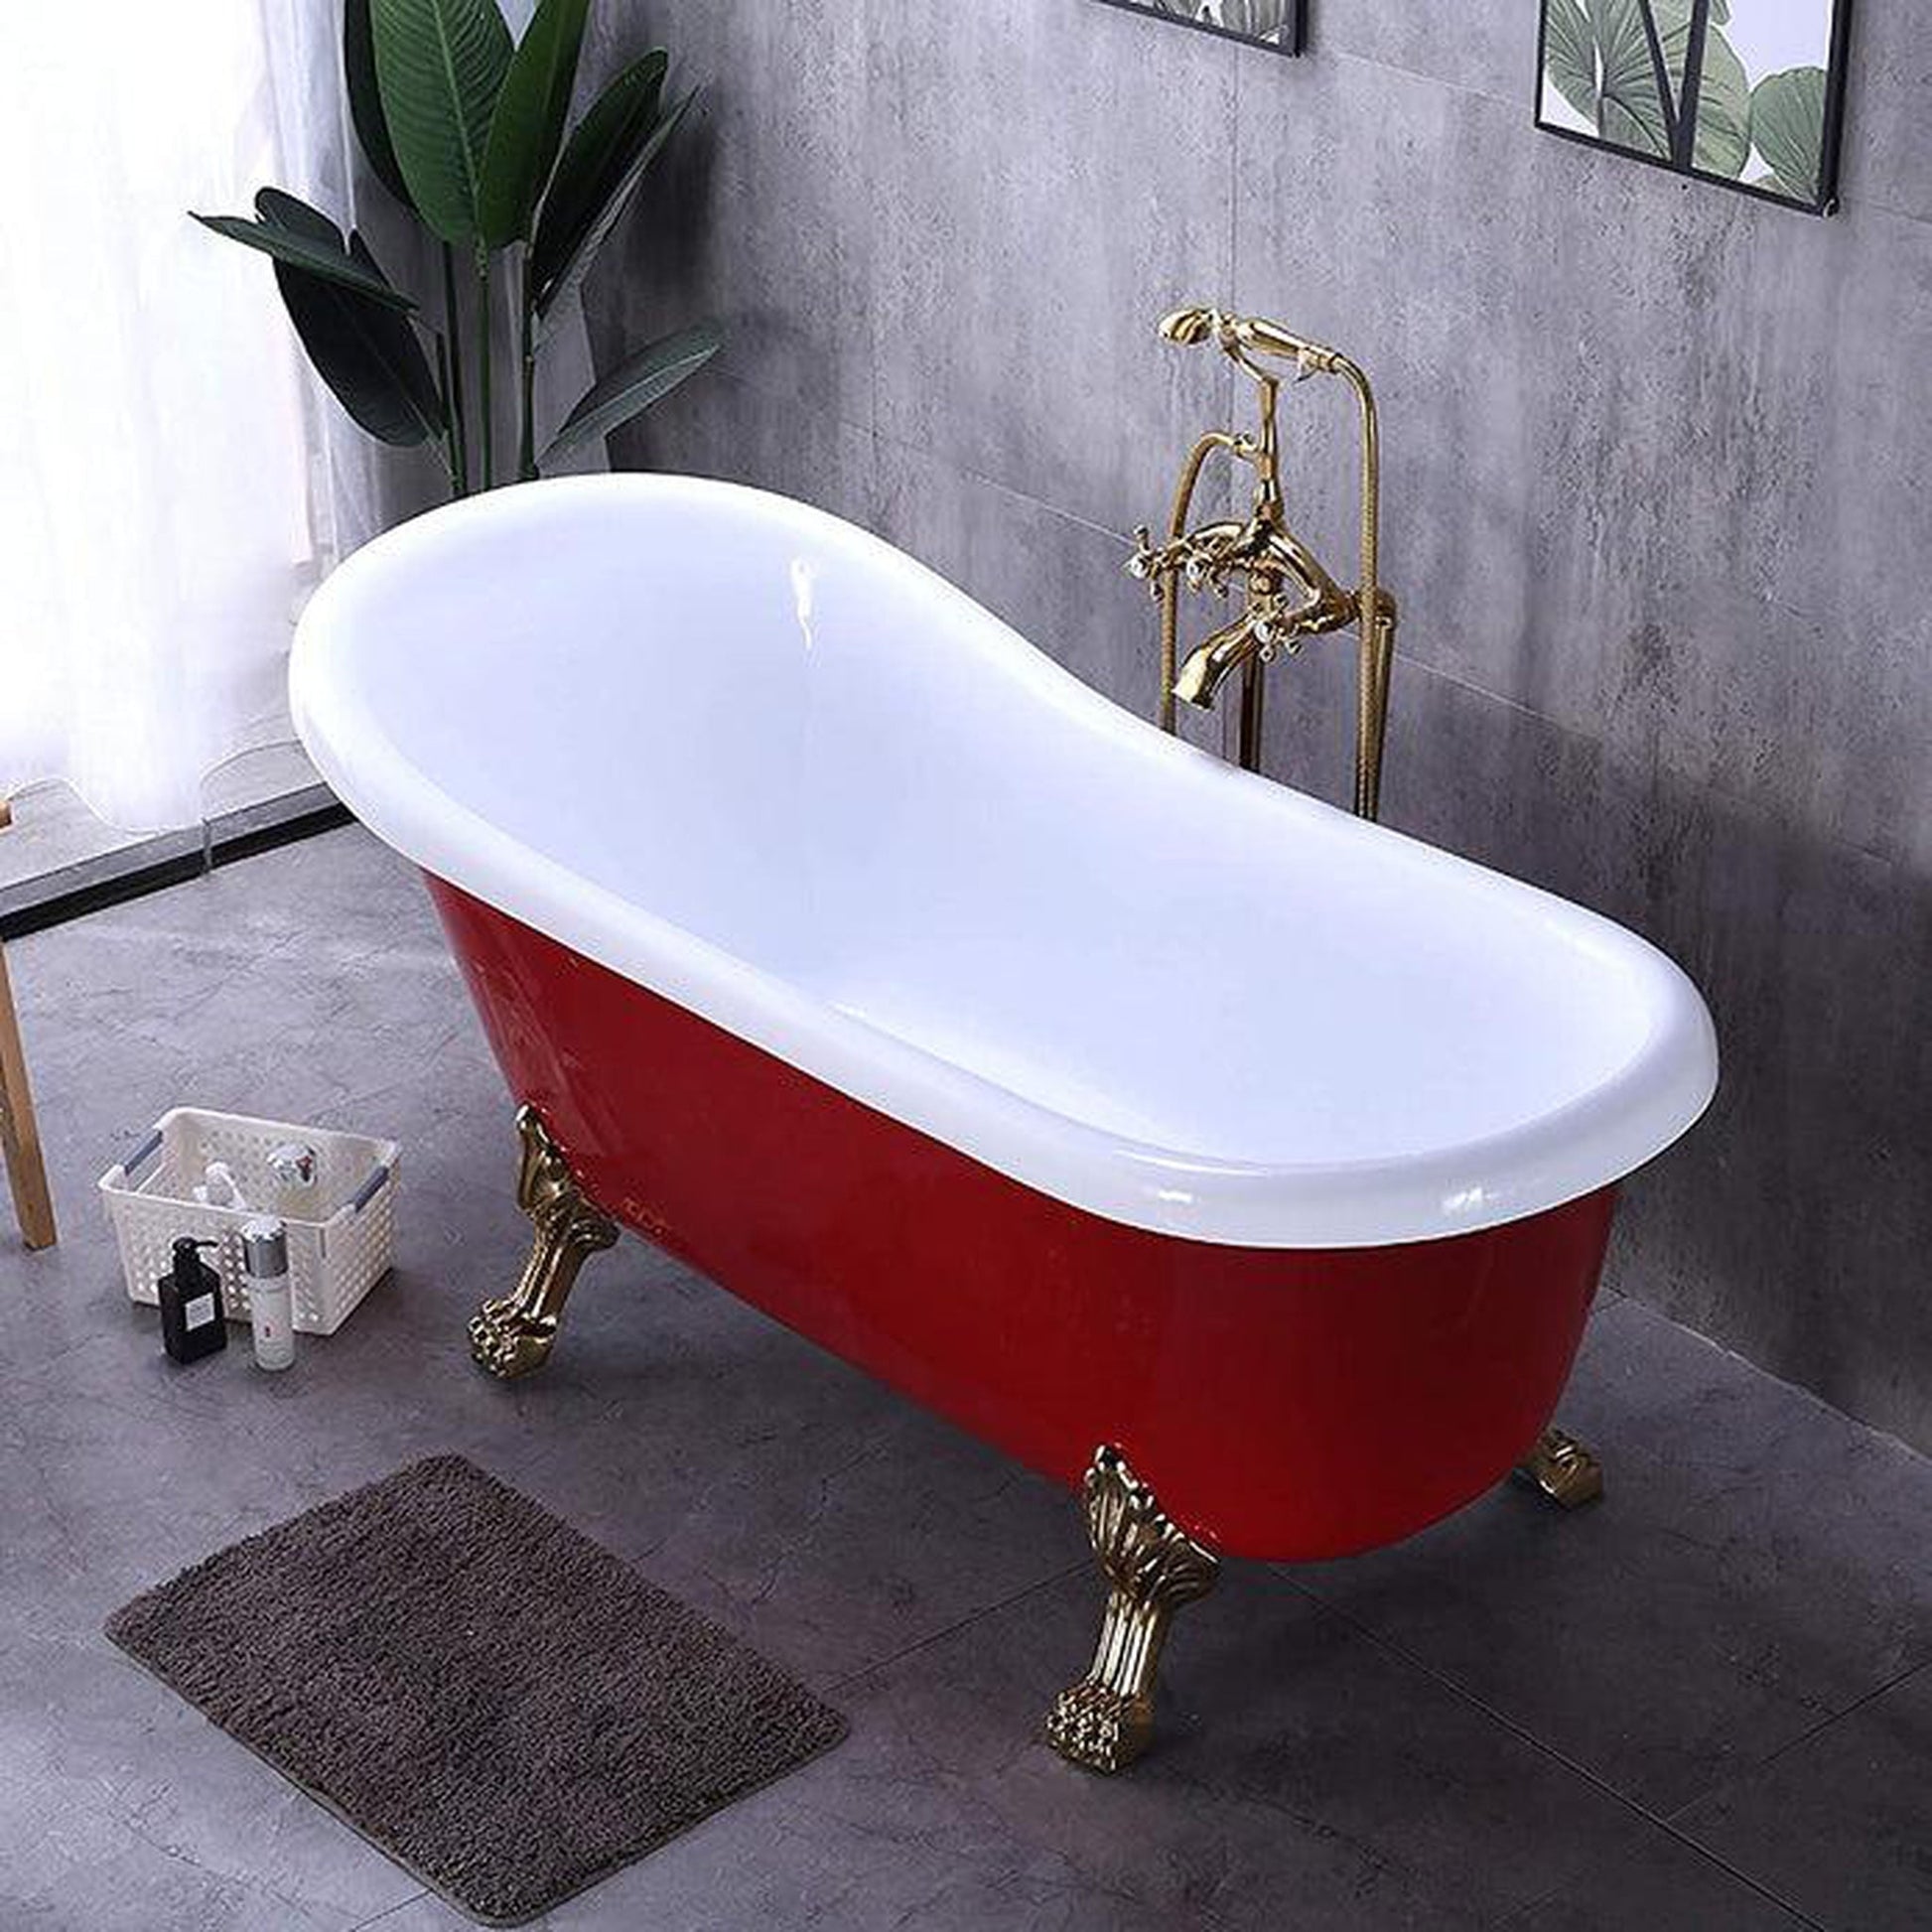 Vanity Art 70" W x 30" H Red Acrylic Freestanding Claw Foot Bathtub With Polished Chrome Pop-up Drain and Flexible Drain Hose